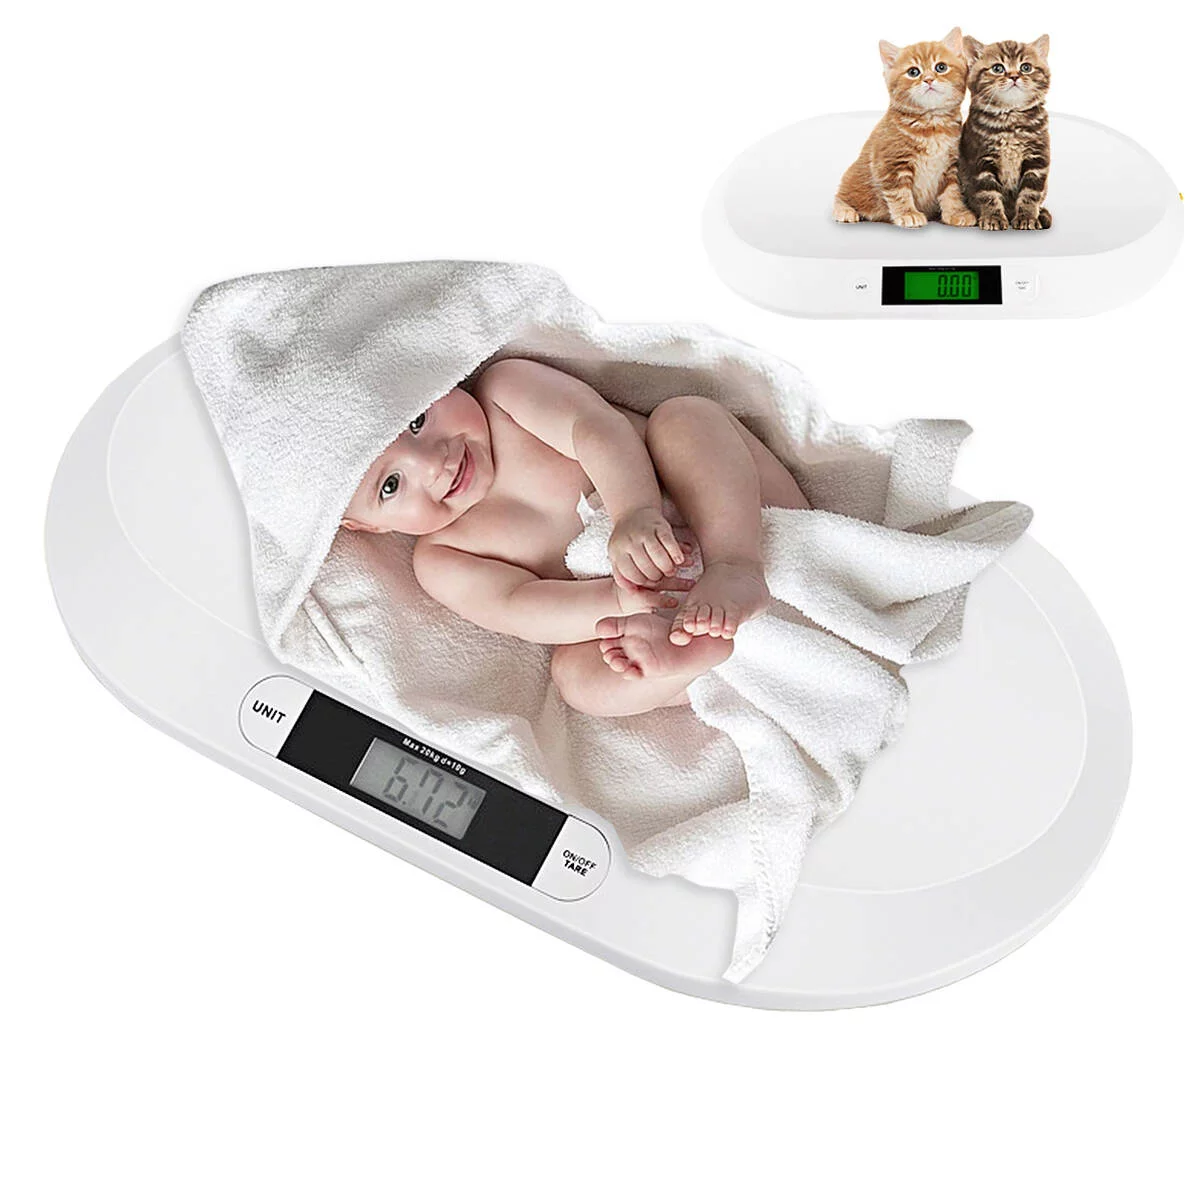 Detecto Digital Infant Scale with Measuring Tape